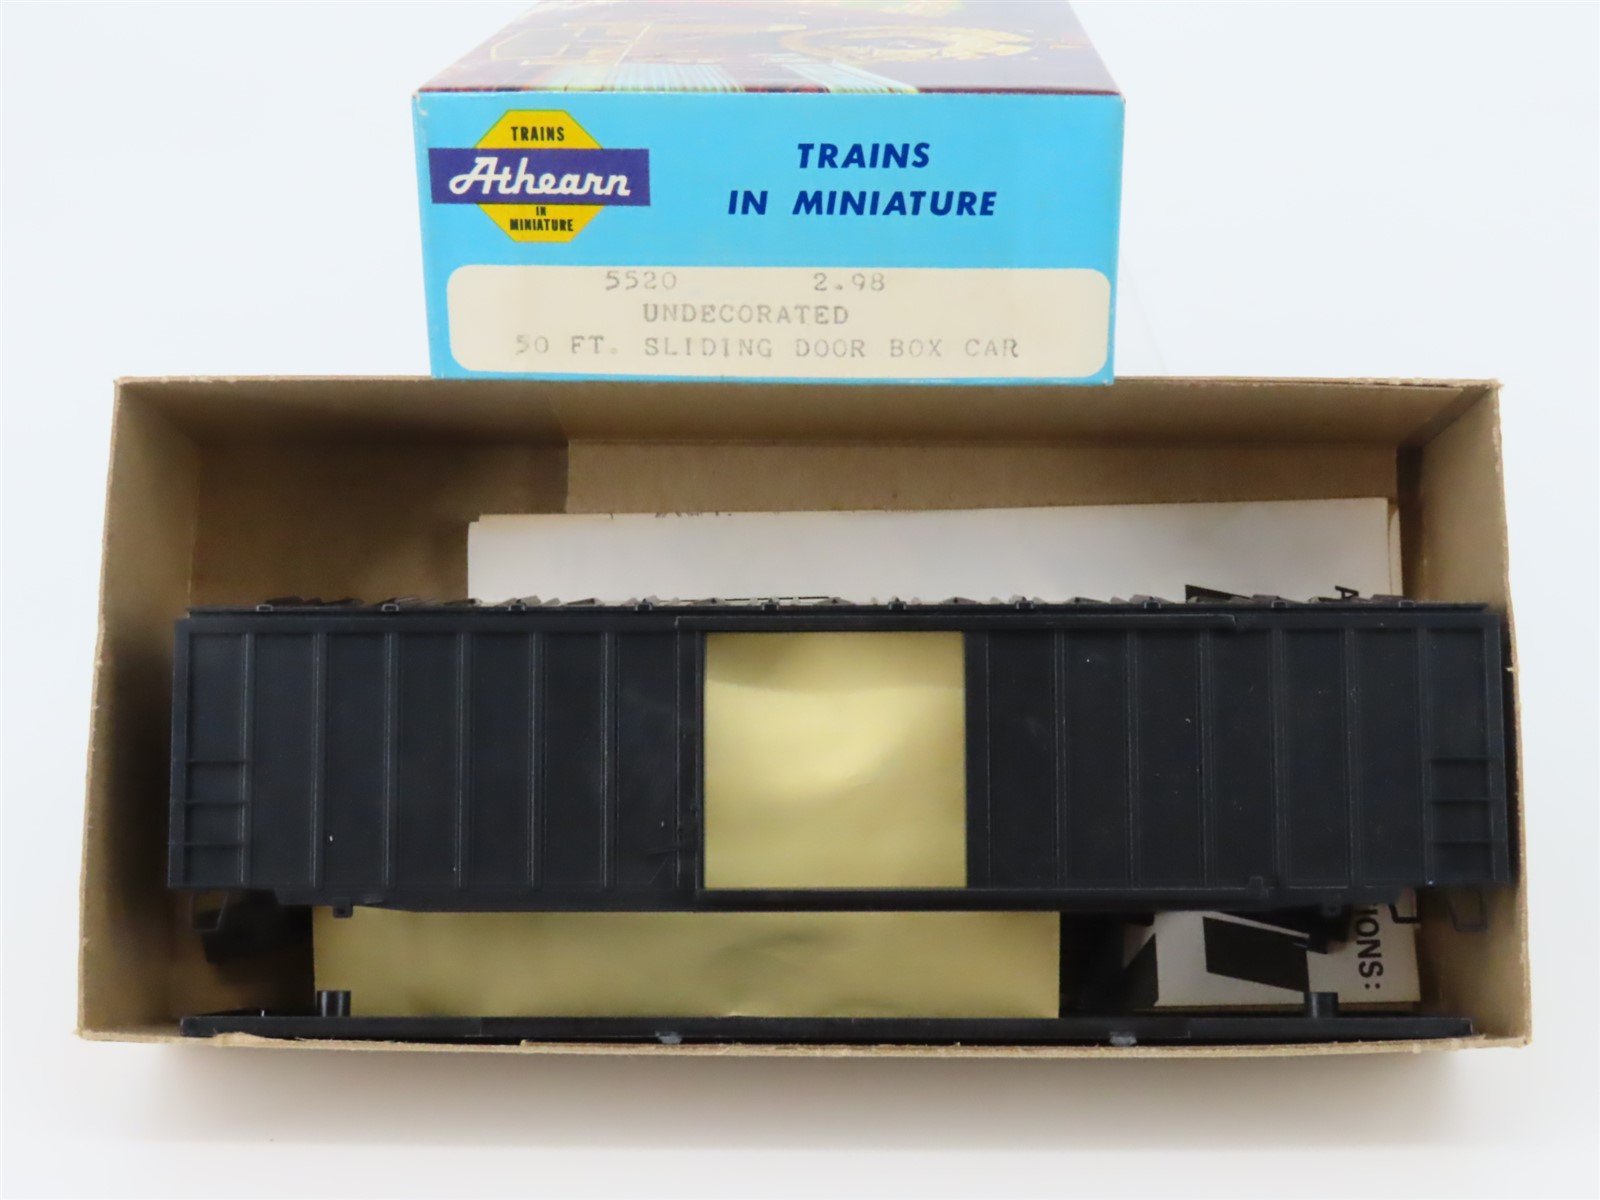 HO Scale Athearn 5520 Undecorated 50' Sliding Door Box Car Kit